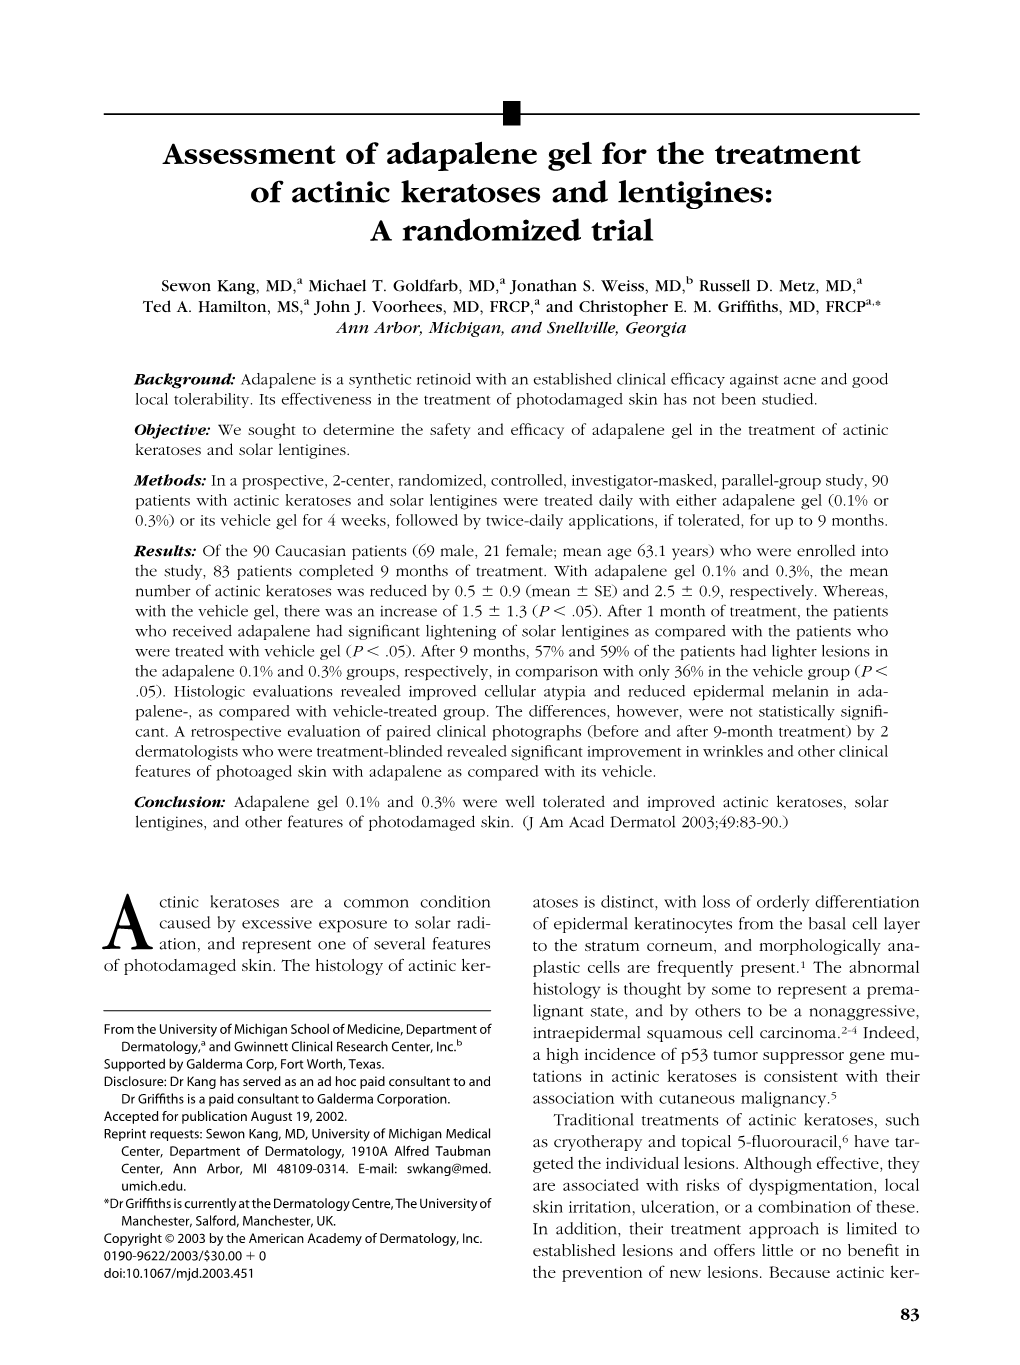 Assessment of Adapalene Gel for the Treatment of Actinic Keratoses and Lentigines: a Randomized Trial